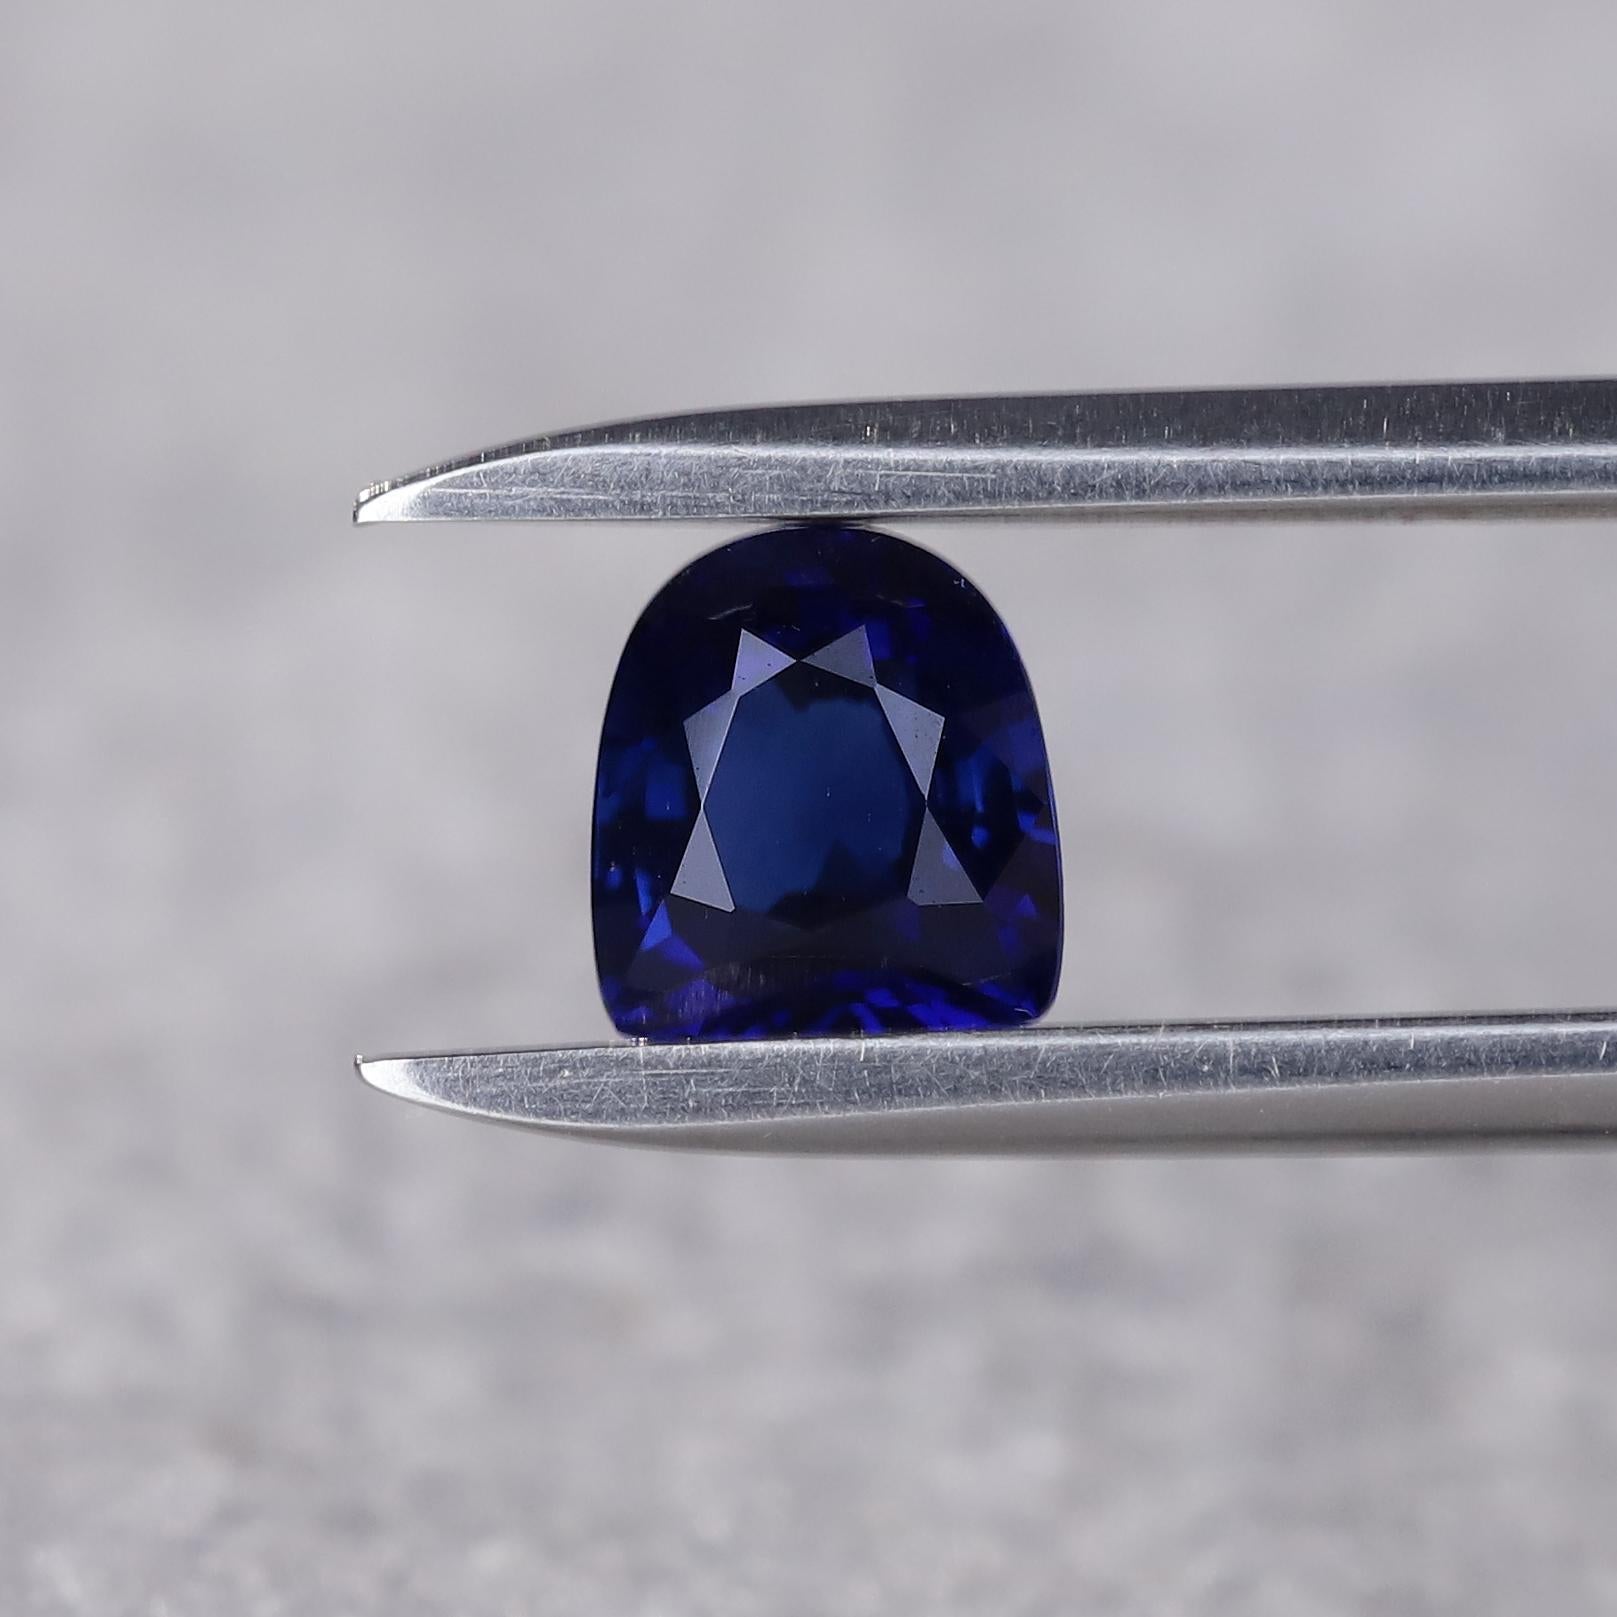 A unique bullet-shaped natural sapphire in rich tones of midnight blue. A fascinating jewel despite being small. 

Natural midnight blue sapphire. Sourced from Ceylon. 1.30 ct 

This magnificent blue sapphire by KNS Gems is available for purchase as